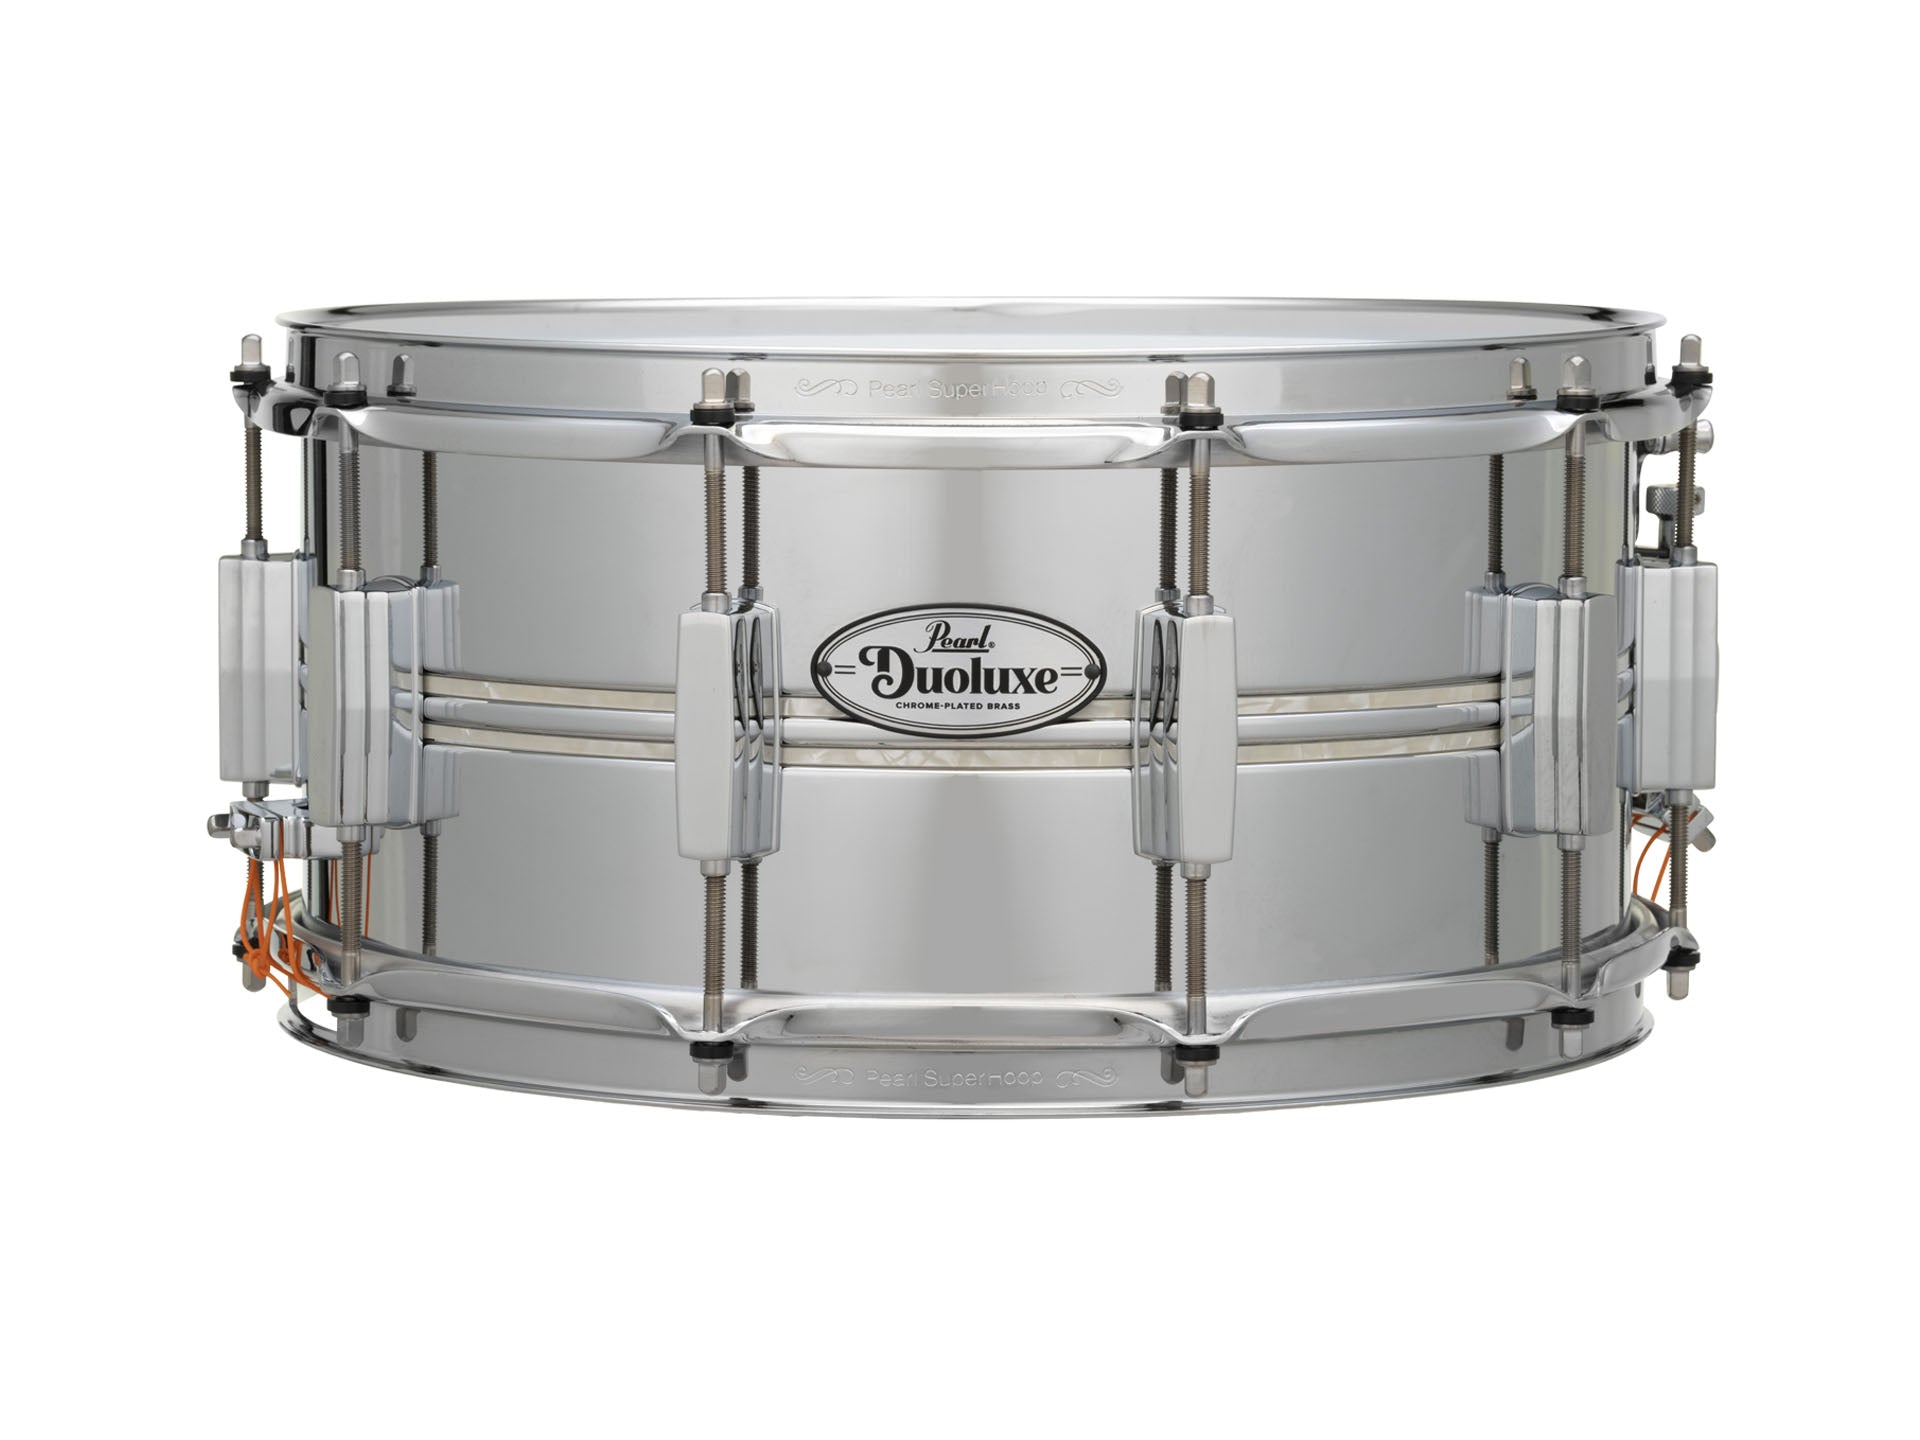 PEARL SensiTone Beaded Steel Snare Drum (Available in 2 sizes